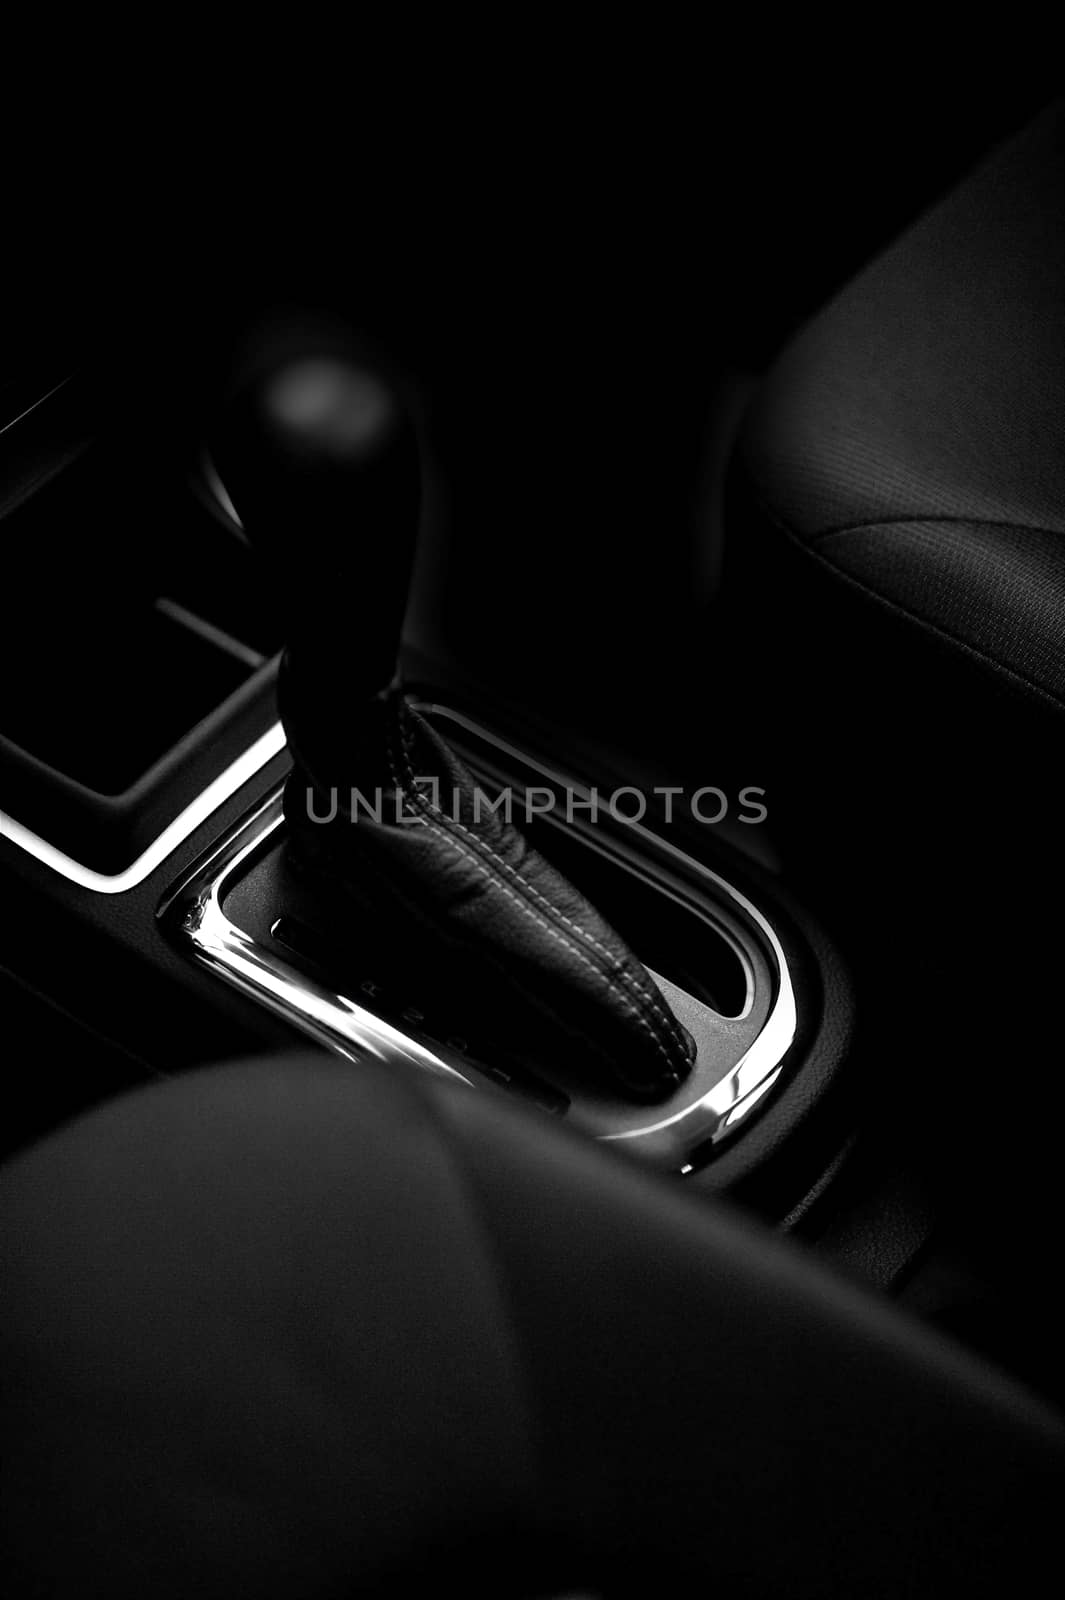 Stick-Shift for Automatic Vehicle Transmission. Black Interior with Seats and Stick-Shift in the Middle. Vehicle Interiors Photo Collection.